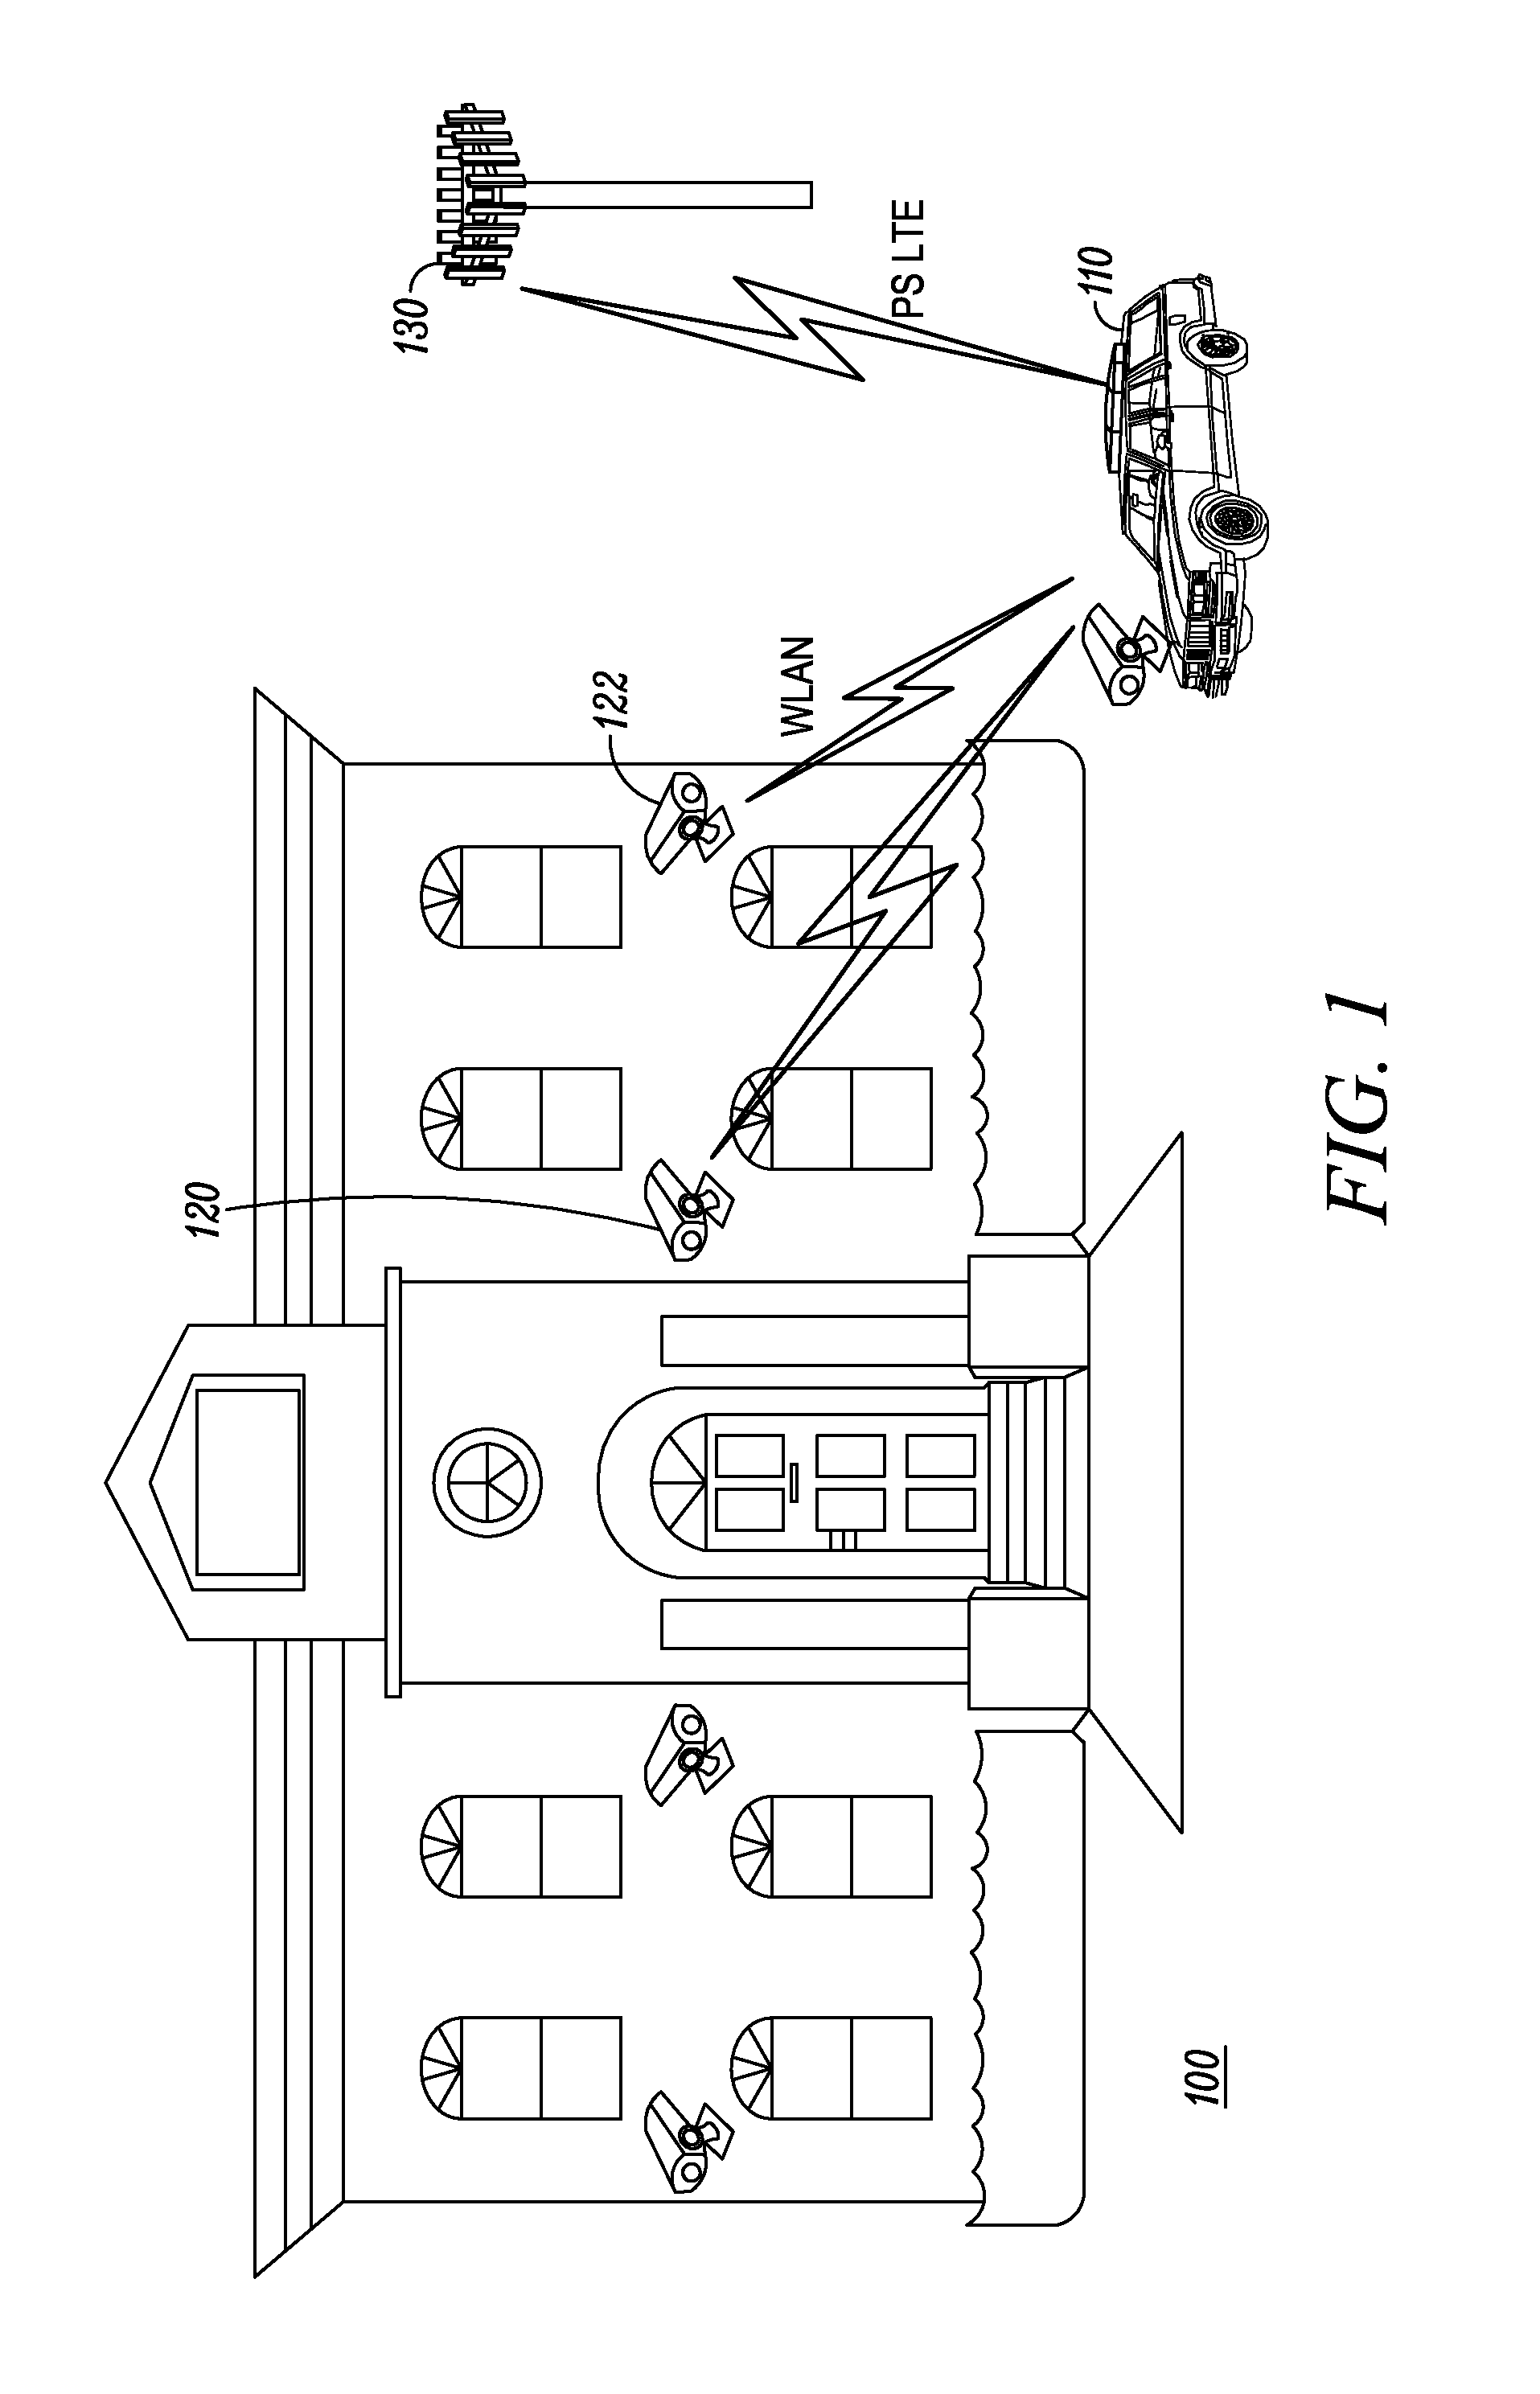 Method and apparatus for receiving a data stream during an incident